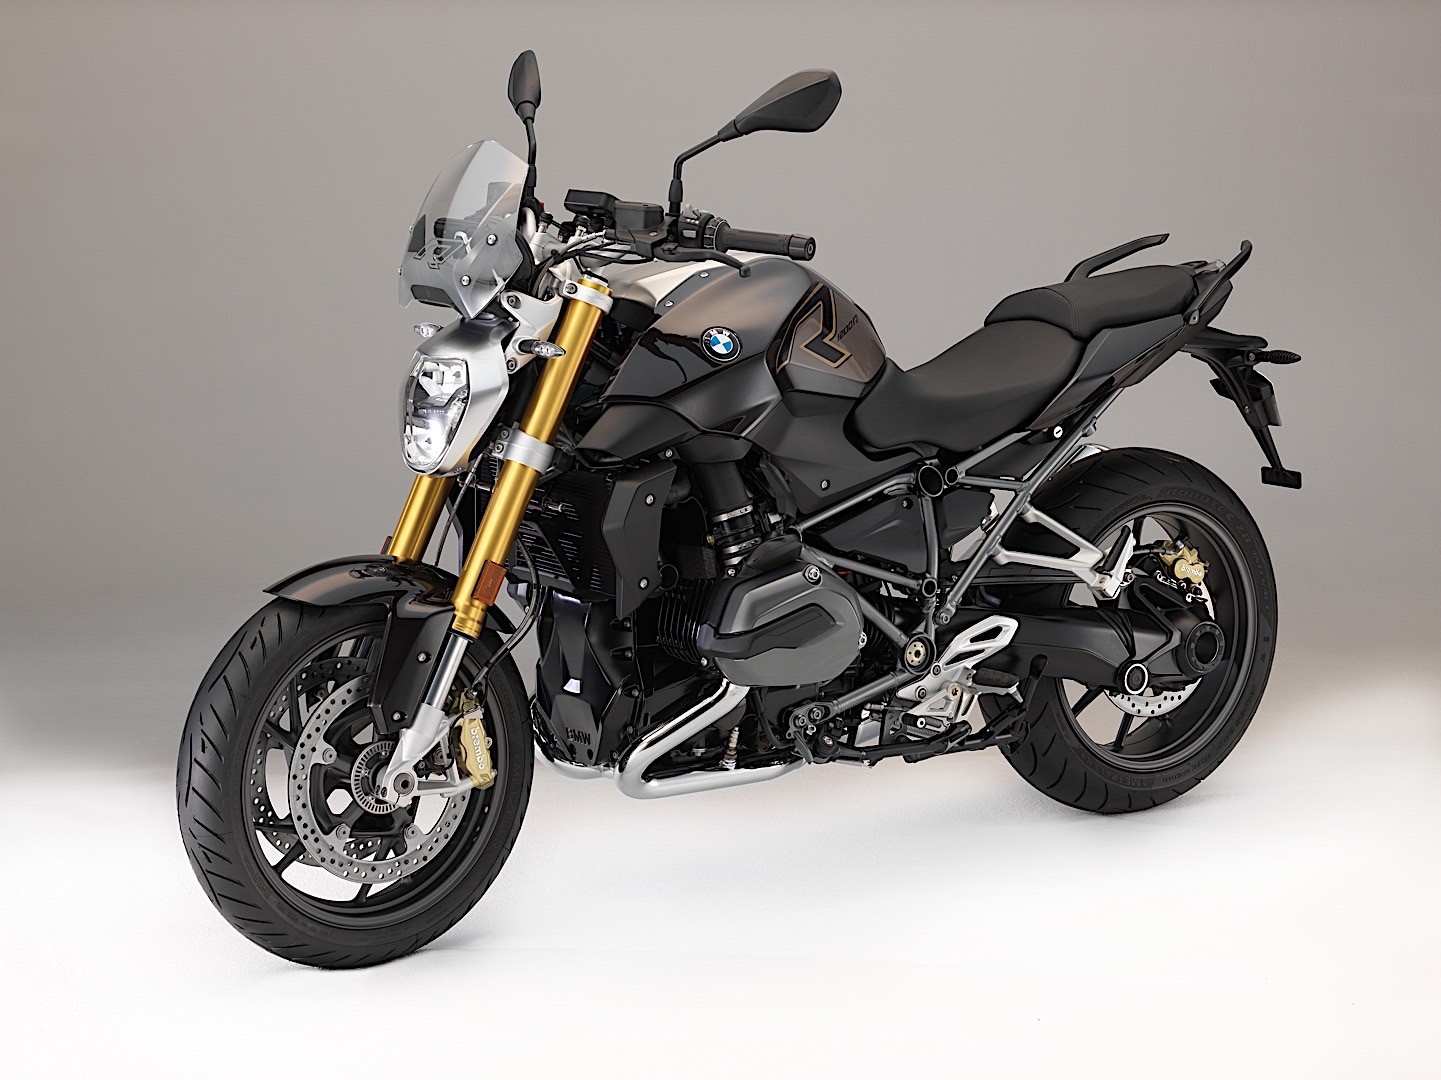 Breathtaking Gallery Of bmw motorcycle 2019 models Concept